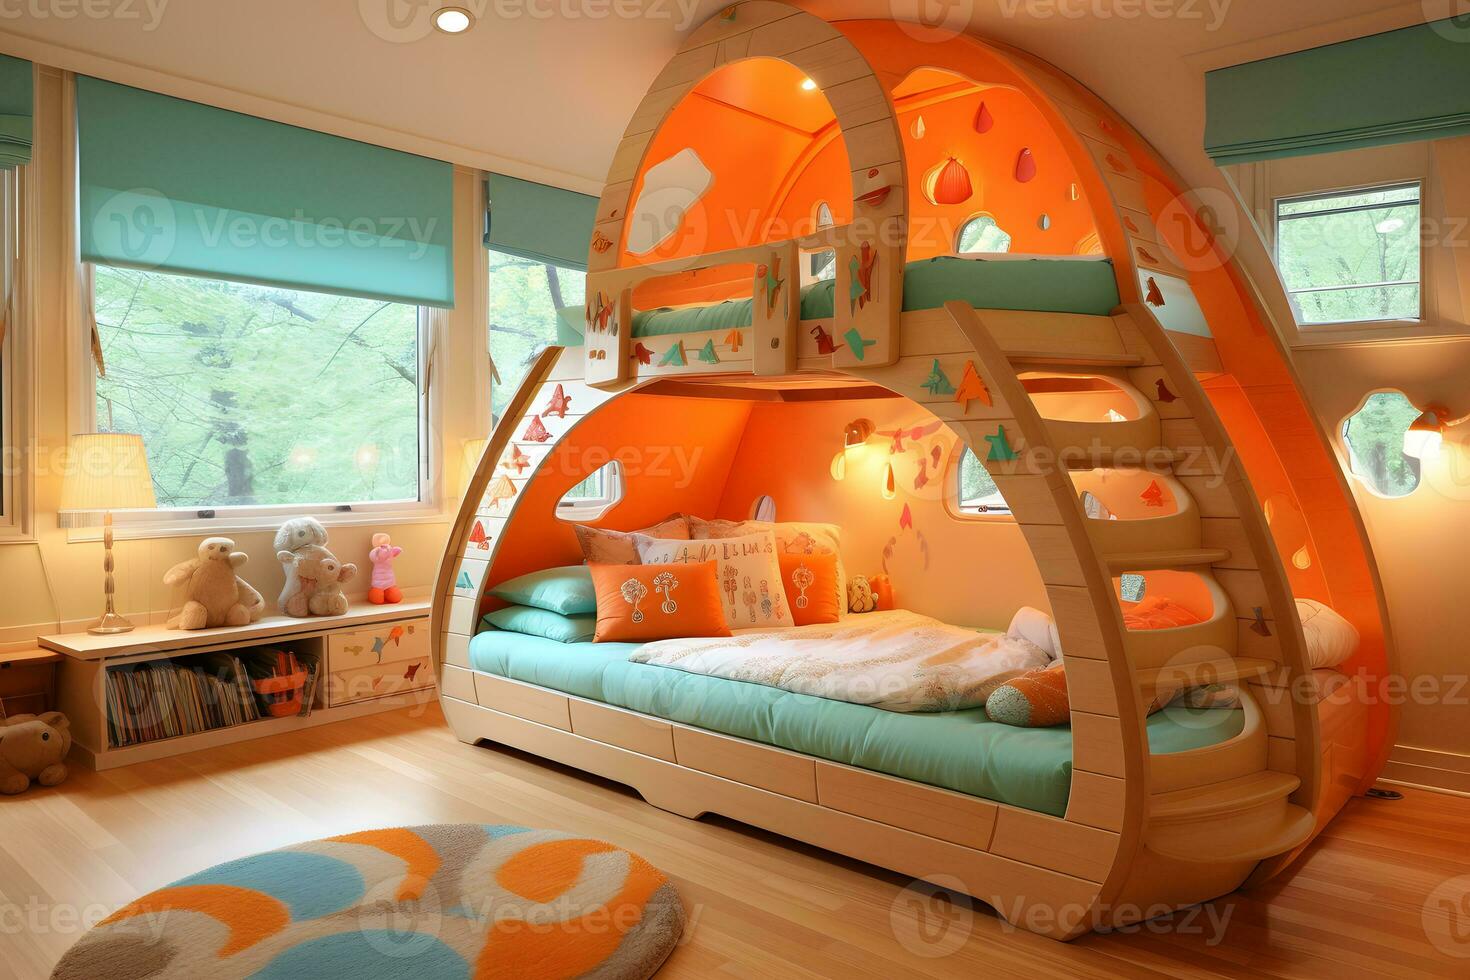 Decorating Inspiration for a Cute Kids Bedroom, ai generated photo